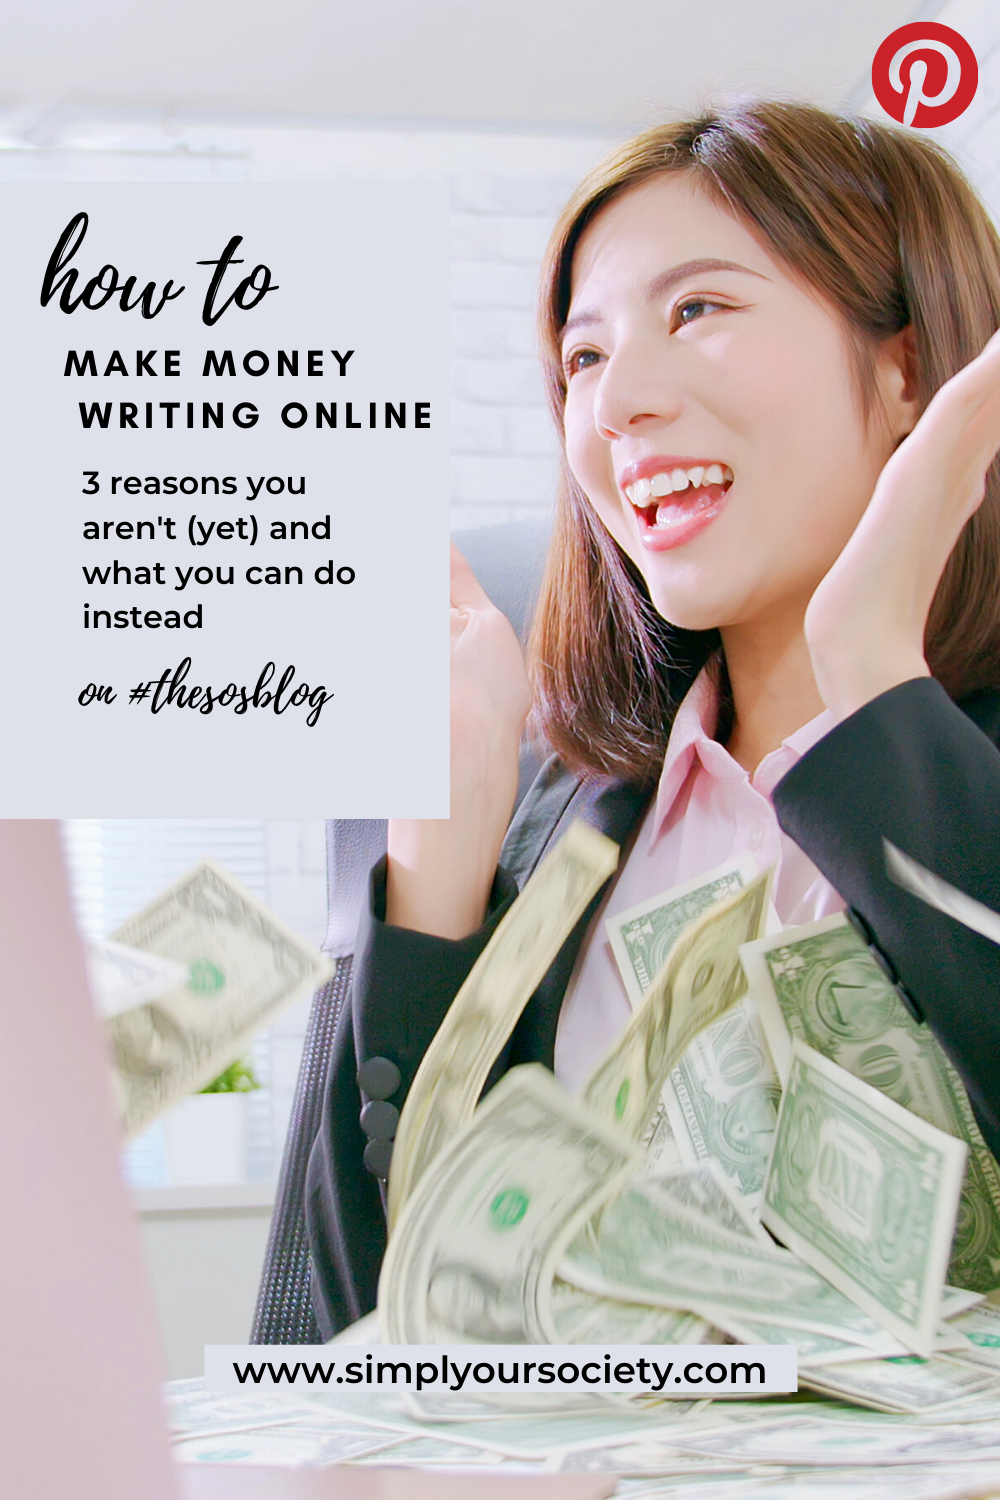 happy woman sitting at a laptop with money shooting out at her, make money online, get paid to write about anything, online writing websites, how to make money online by writing, making money online writing, writing articles for money